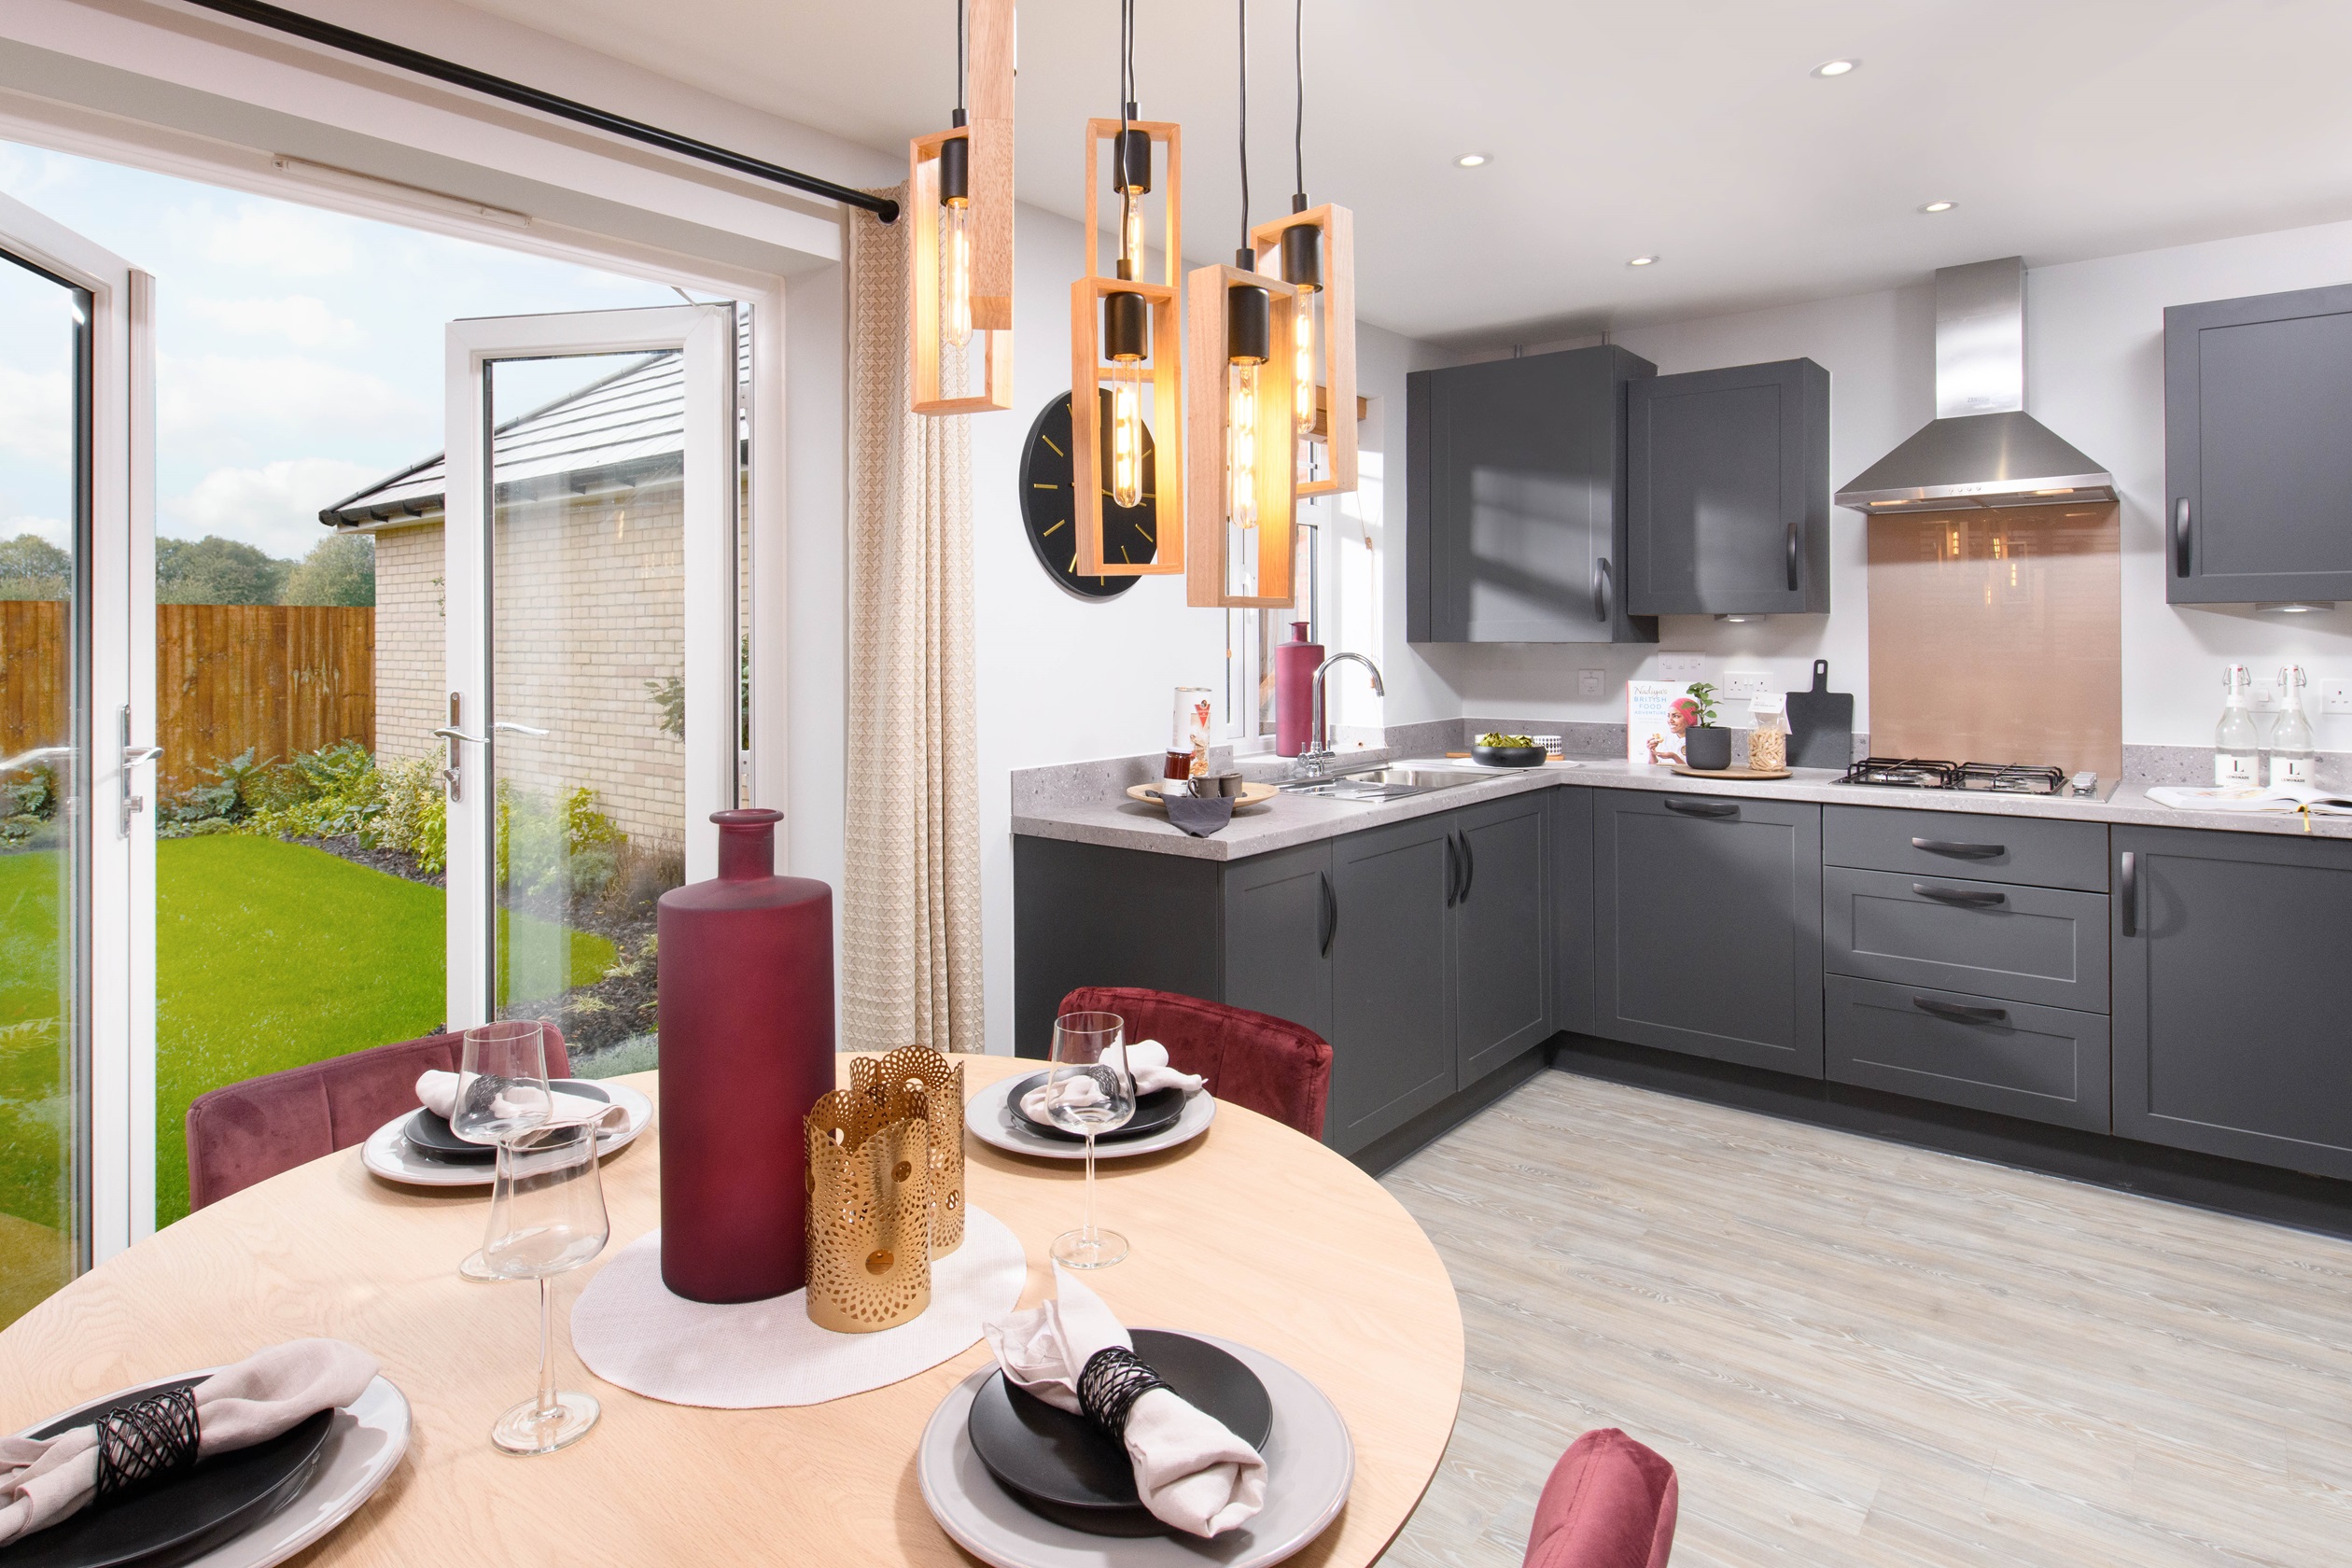 Property 3 of 8. Kennett Kitchen Dining Room Woodland Heath Dwh